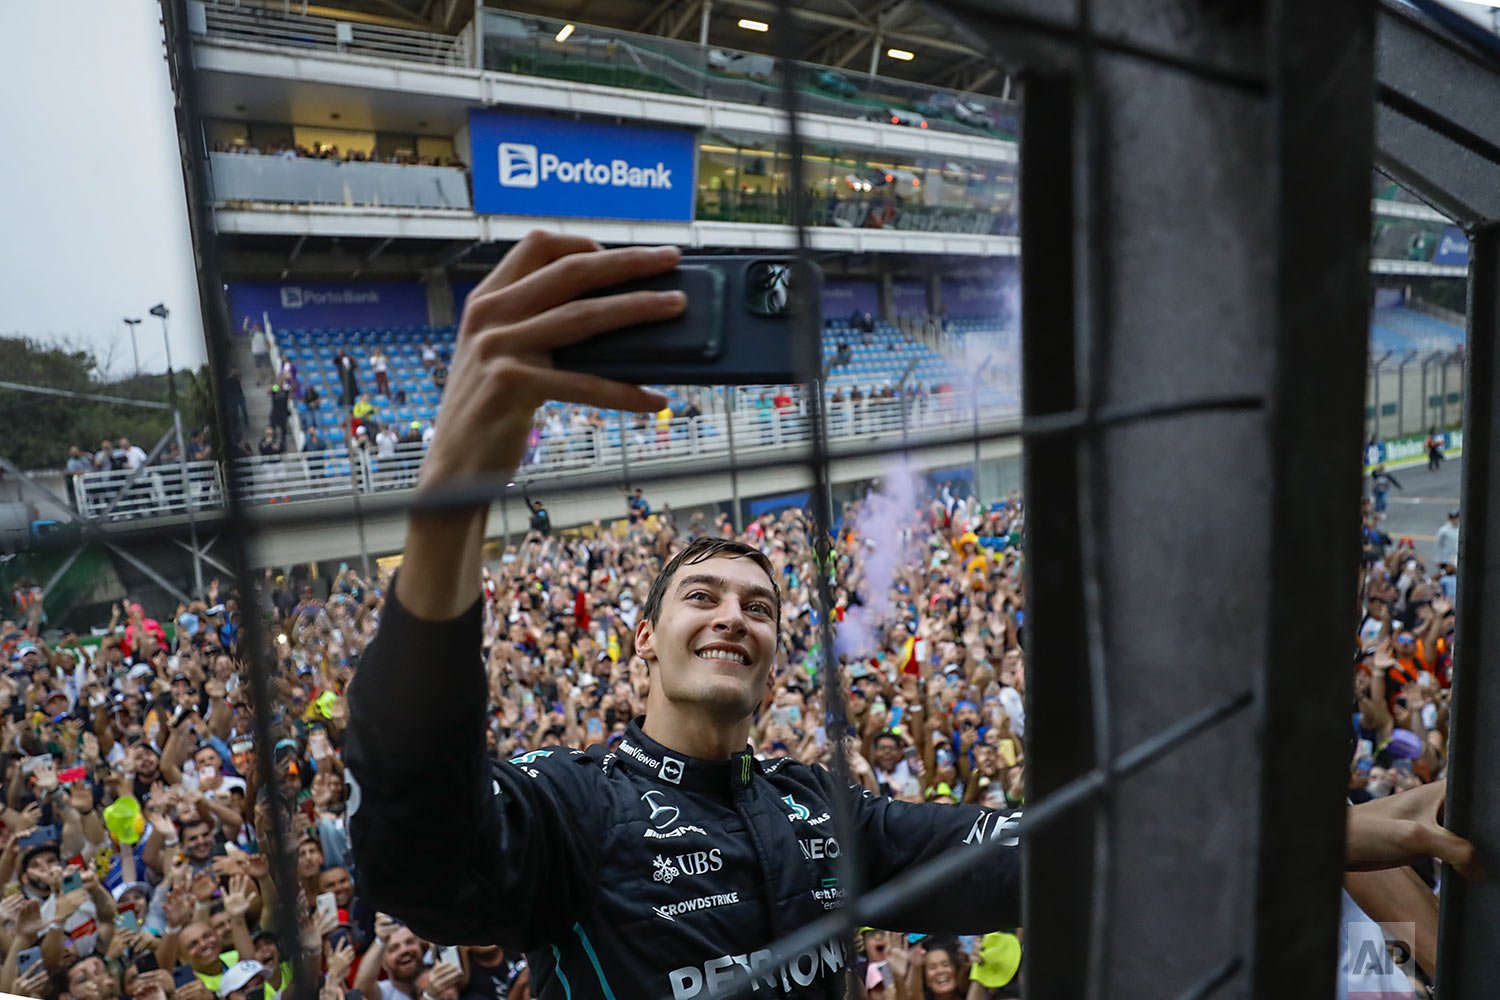  Mercedes driver George Russell, of Britain, takes a selfie with the crowd in the background after winning the Brazilian Formula One Grand Prix at the Interlagos race track in Sao Paulo, Brazil, Sunday, Nov. 13, 2022. (AP Photo/Marcelo Chello) 